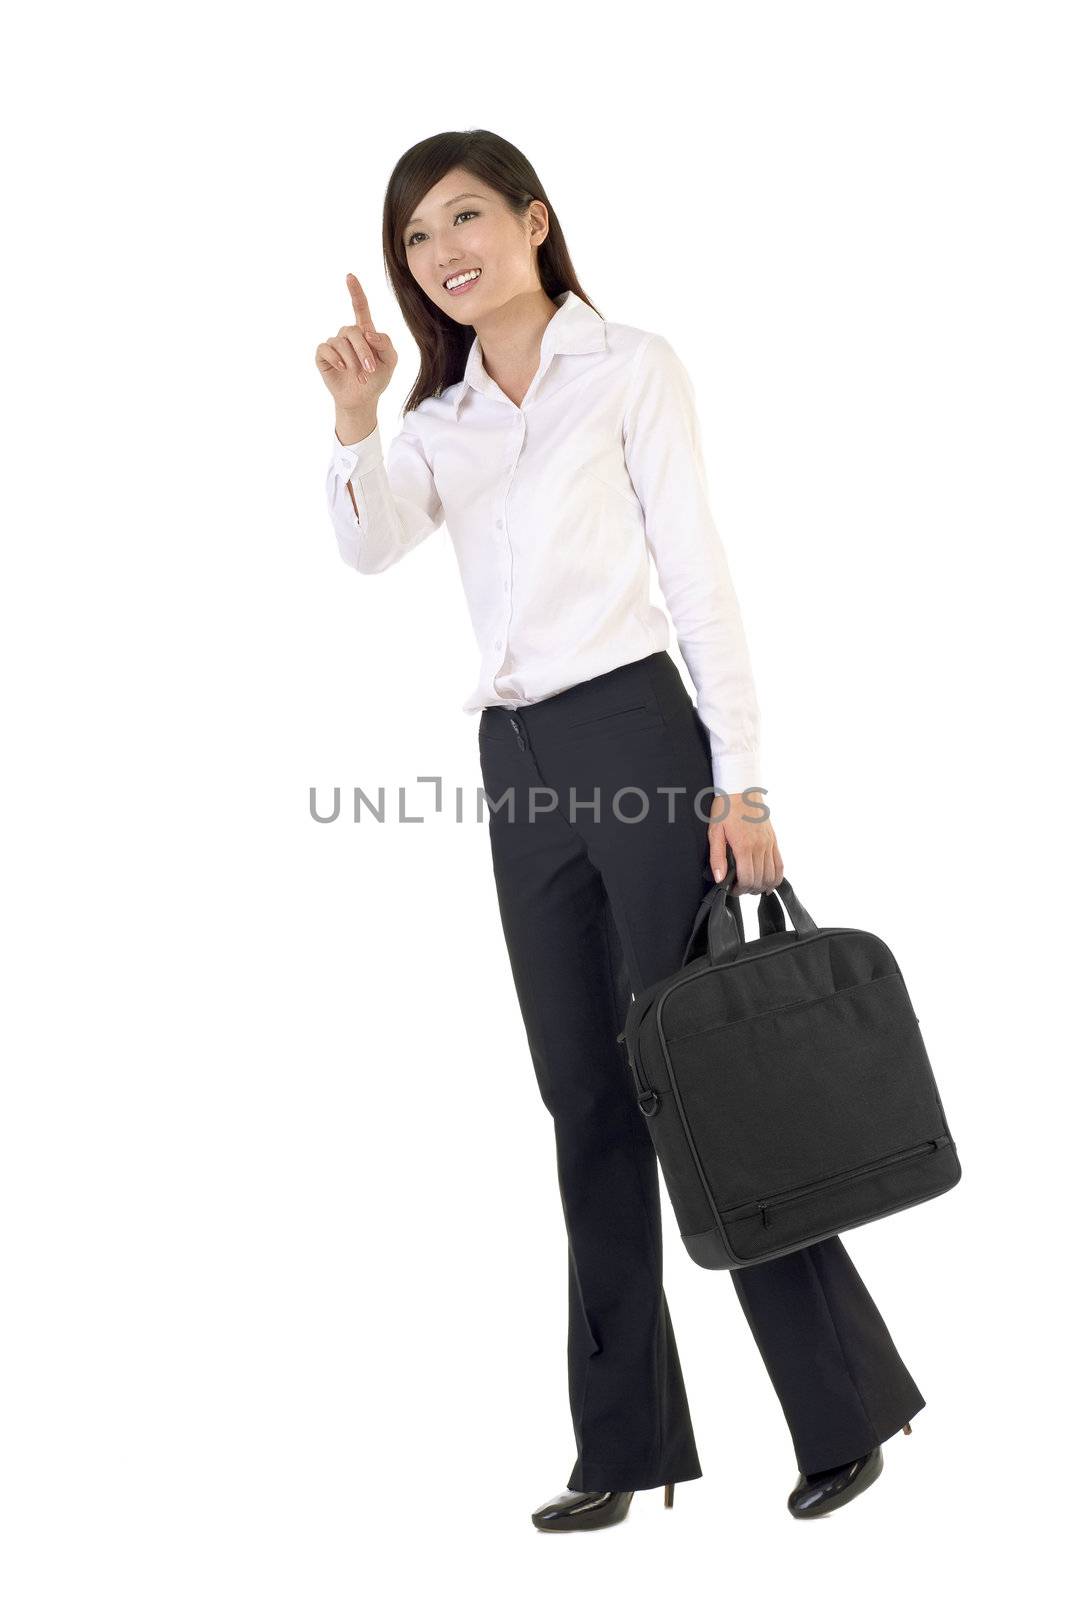 Asian businesswoman portrait with briefcase standing and point on white background.